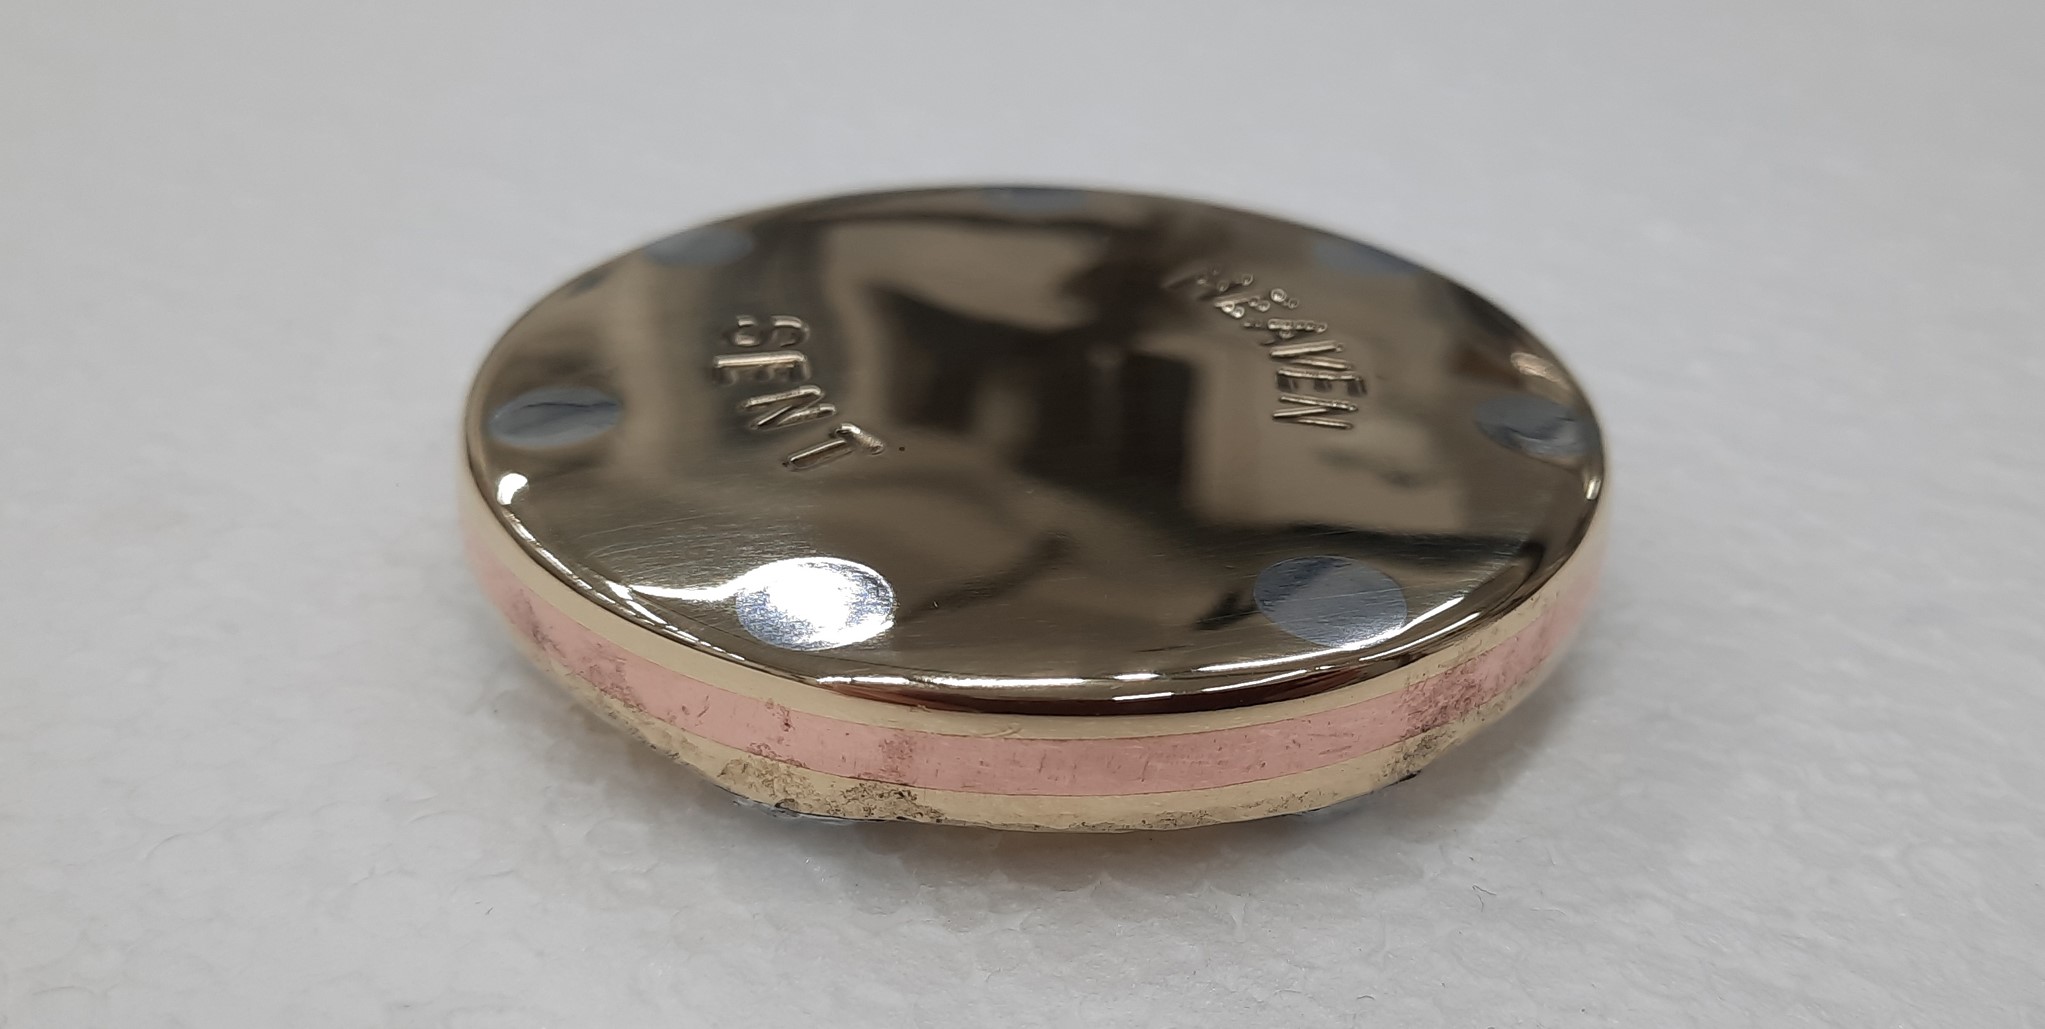 A metal sculpture by Marek Jeczalik. A small Bronze disc with a polished upper, depicts the words 'Heaven Stole'